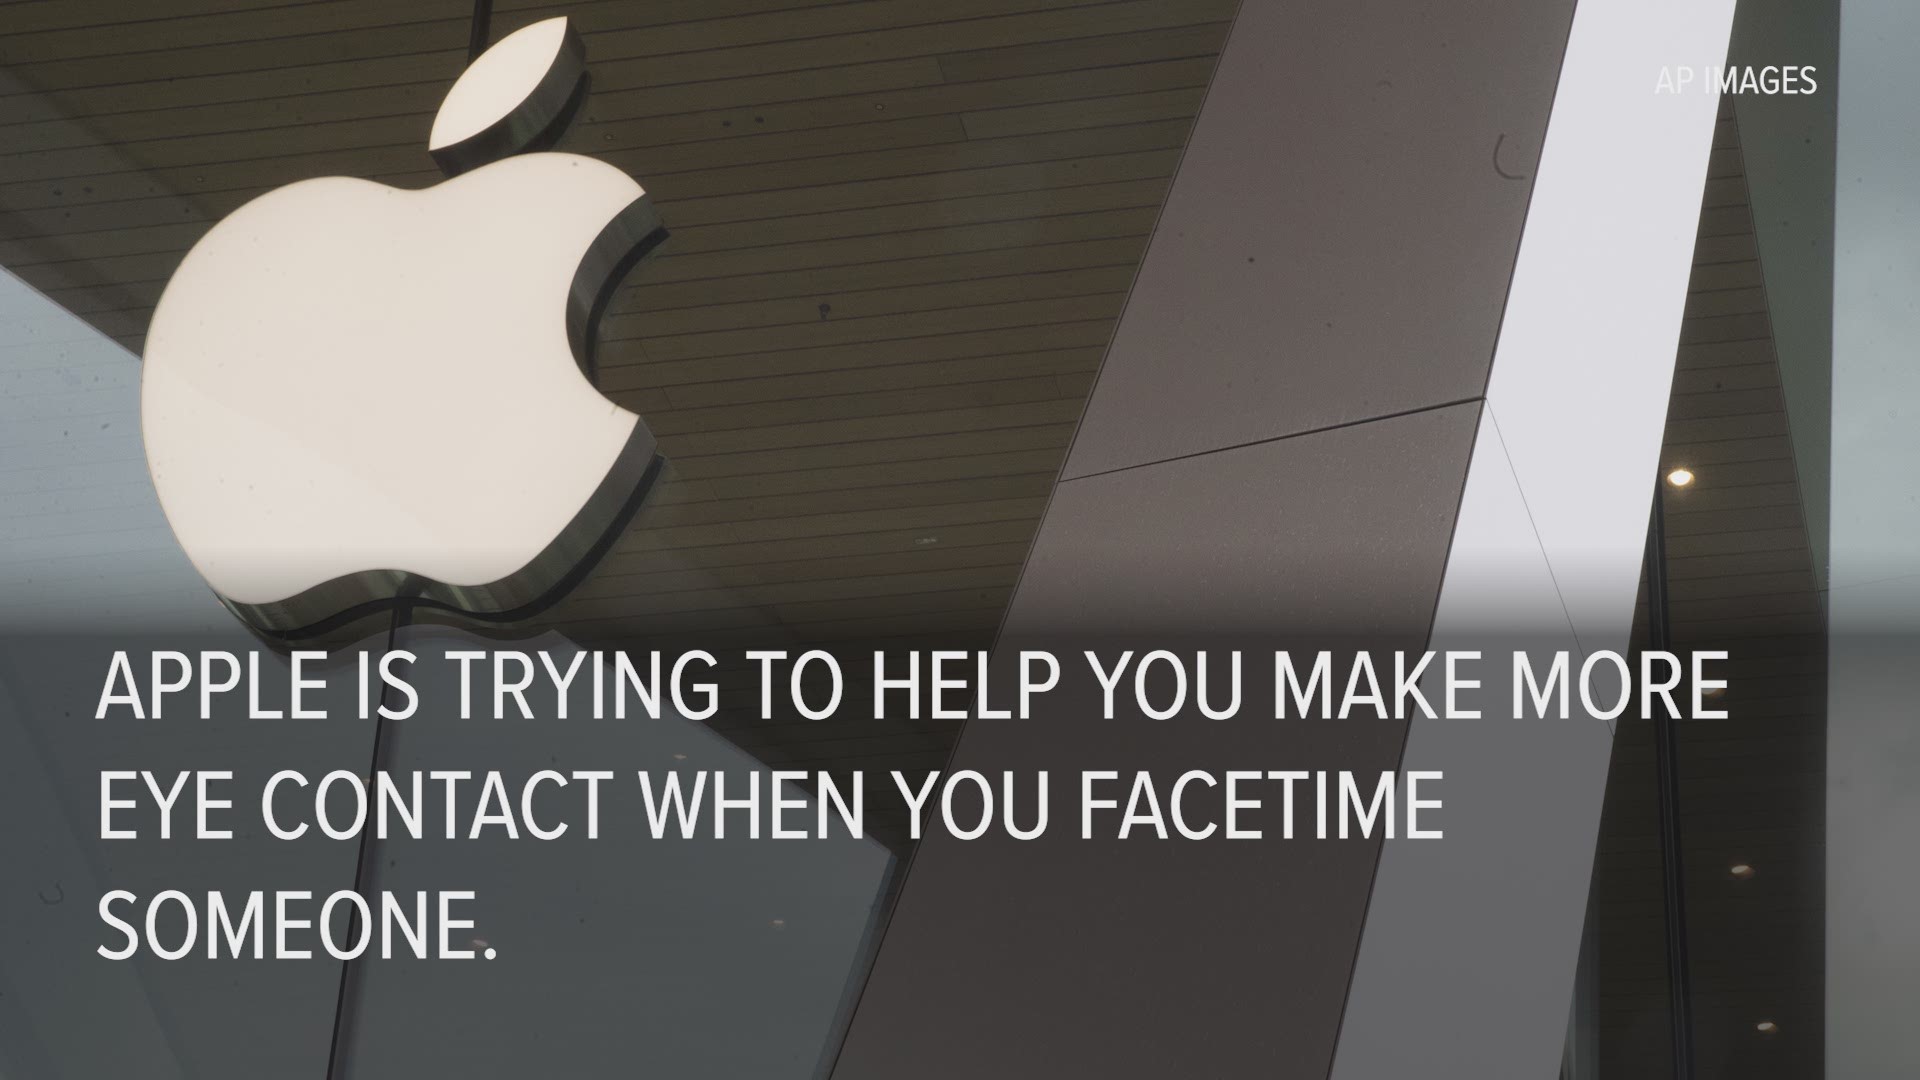 Apple is trying to help people make eye contact when they FaceTime someone.